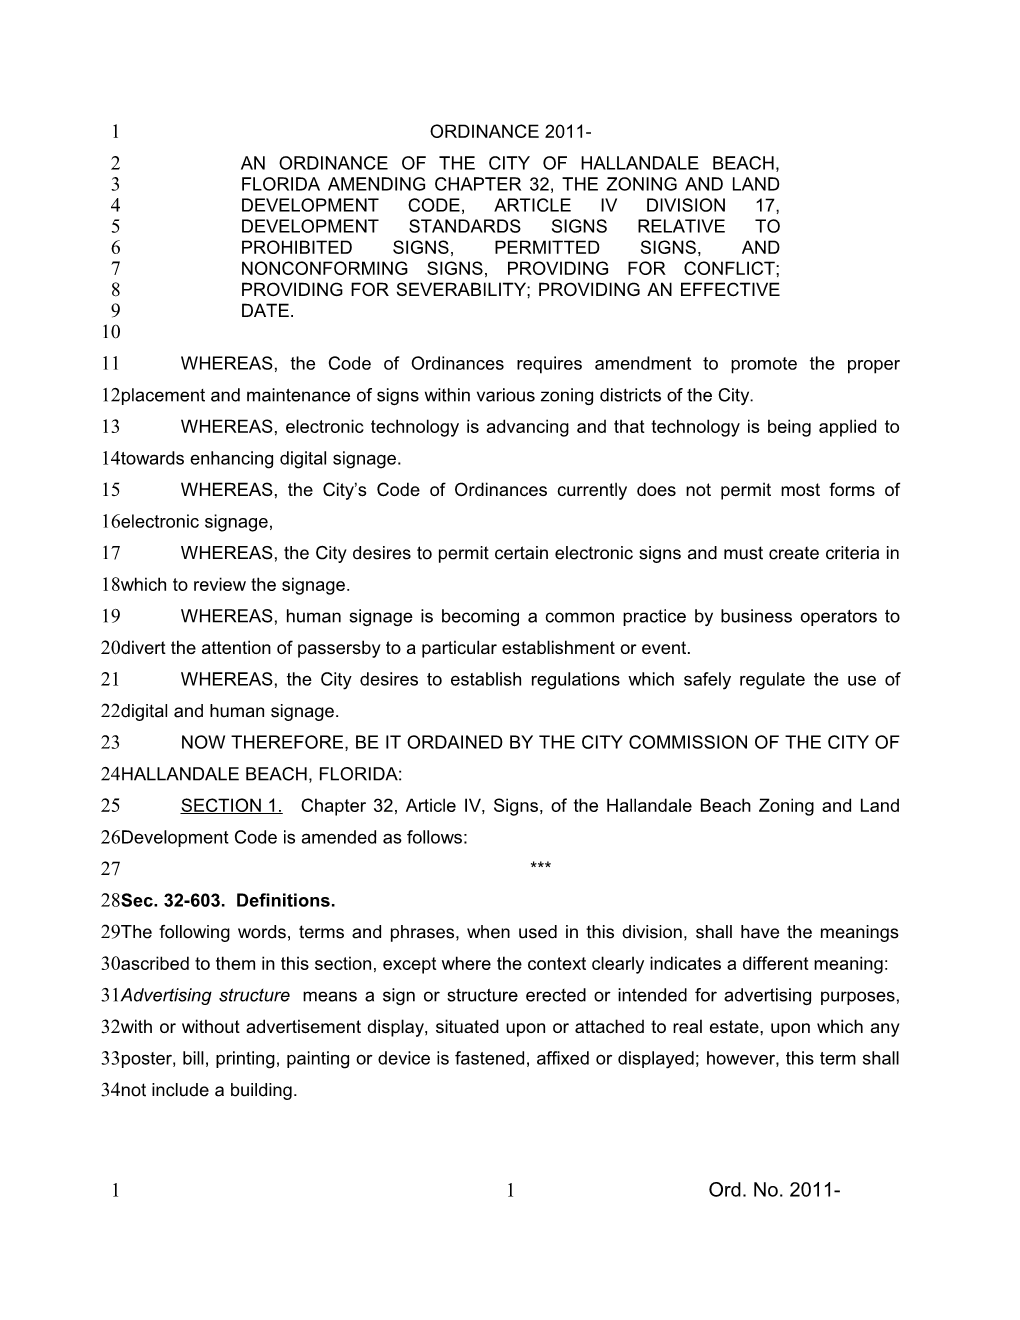 An Ordinance of the City of Hallandale Beach, Florida Amending Chapter 32, the Zoning And